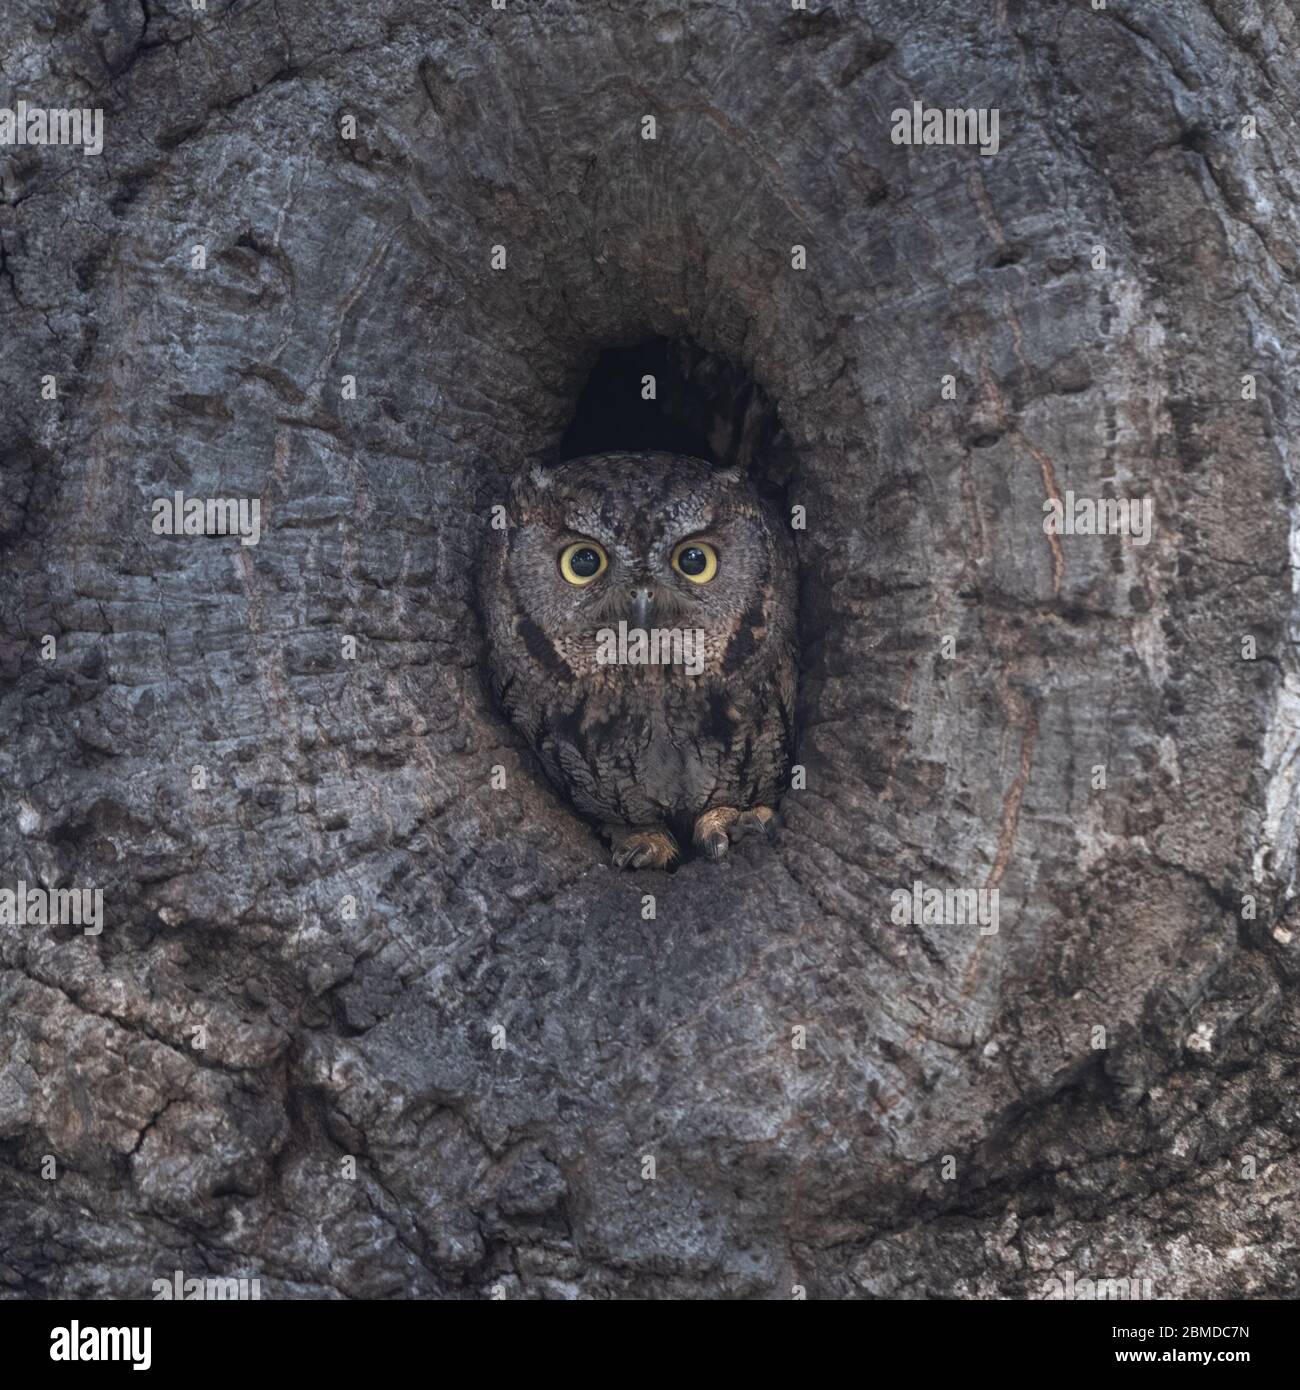 The Bark Lives - This Western Screech Owl is in the center of my frame, but avoids being seen with its amazing camouflage. Stock Photo